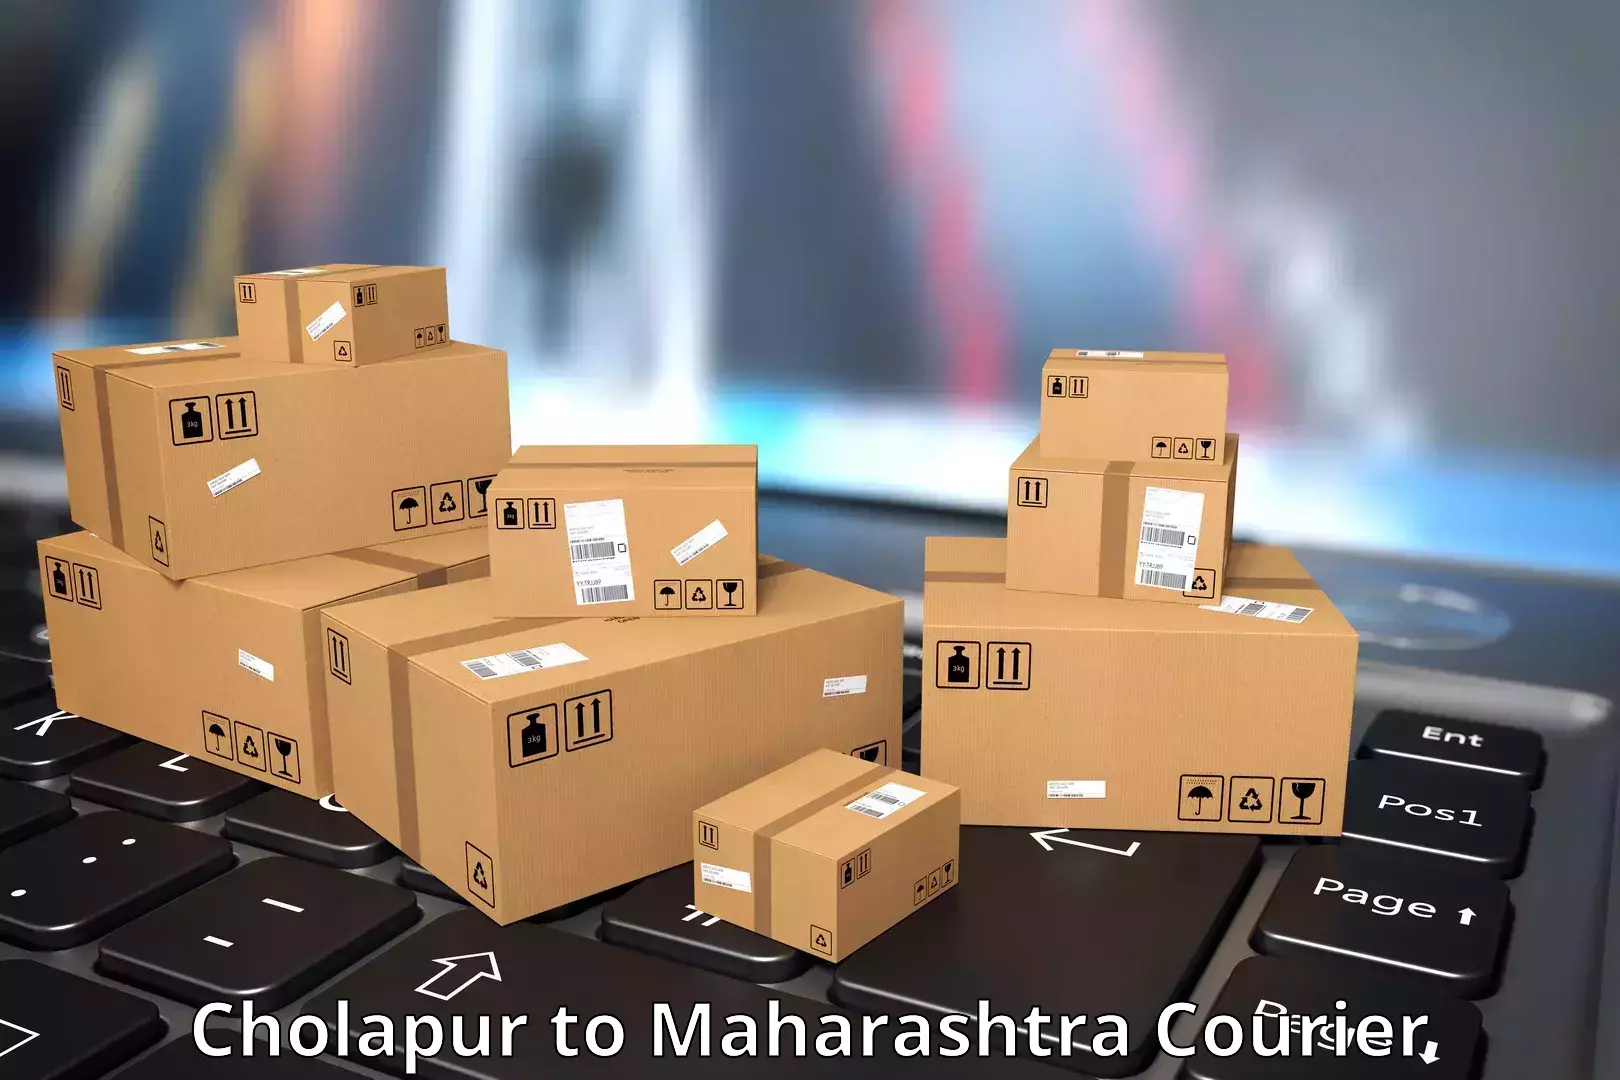 Global courier networks Cholapur to Kalyan